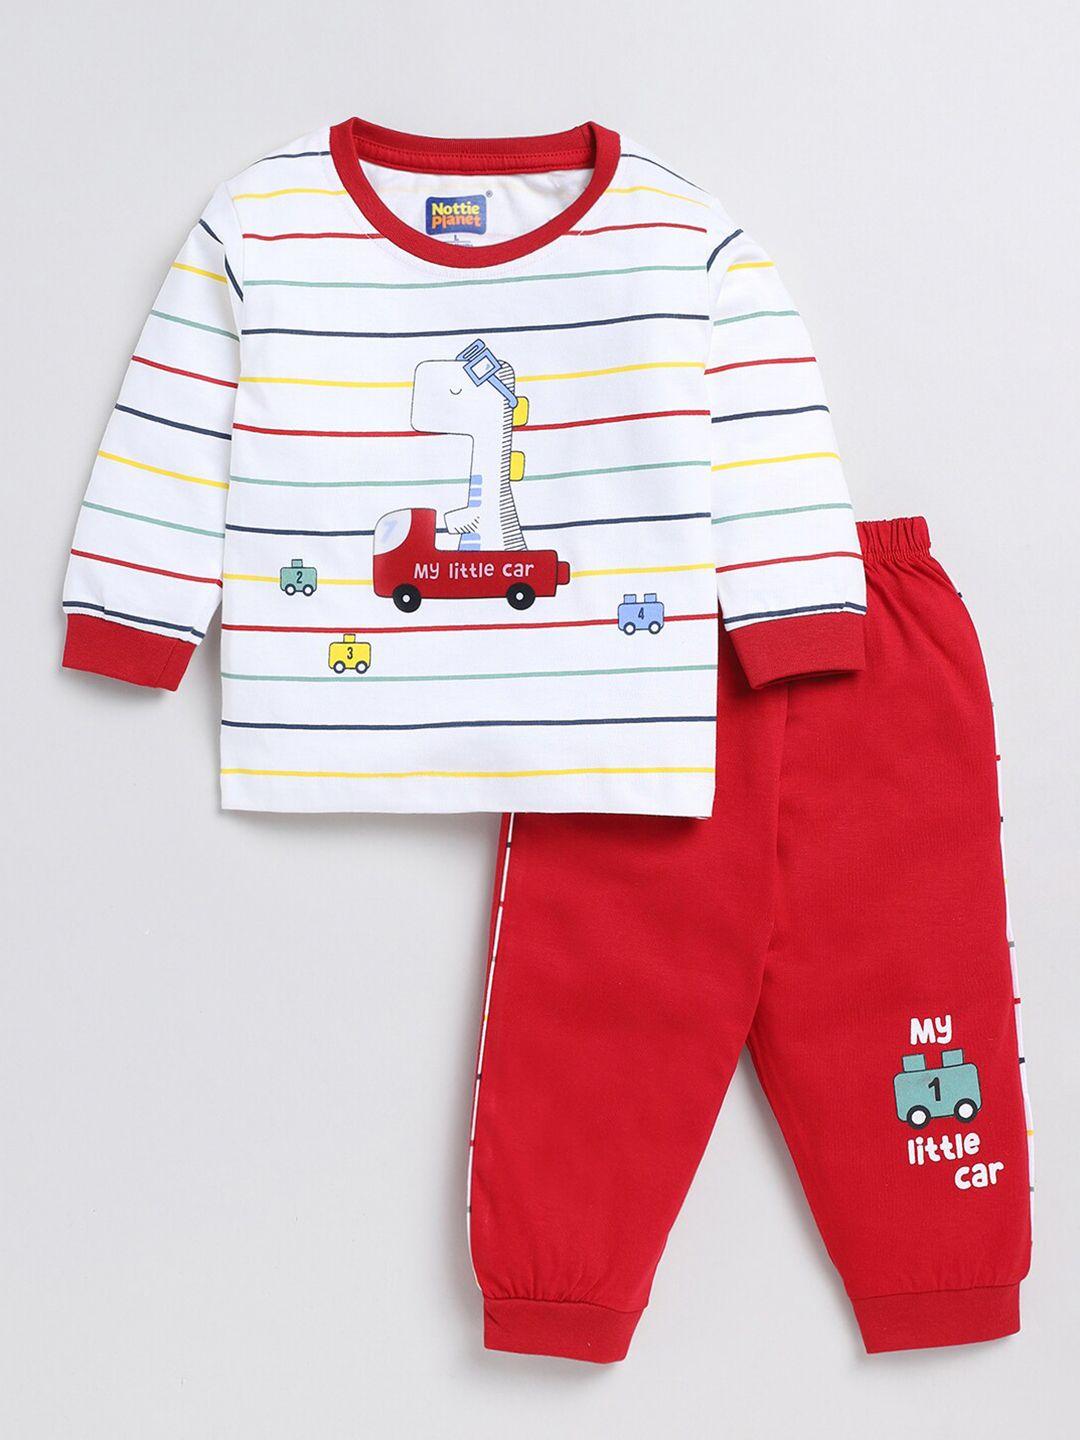 nottie planet boys printed pure cotton t-shirt with trousers